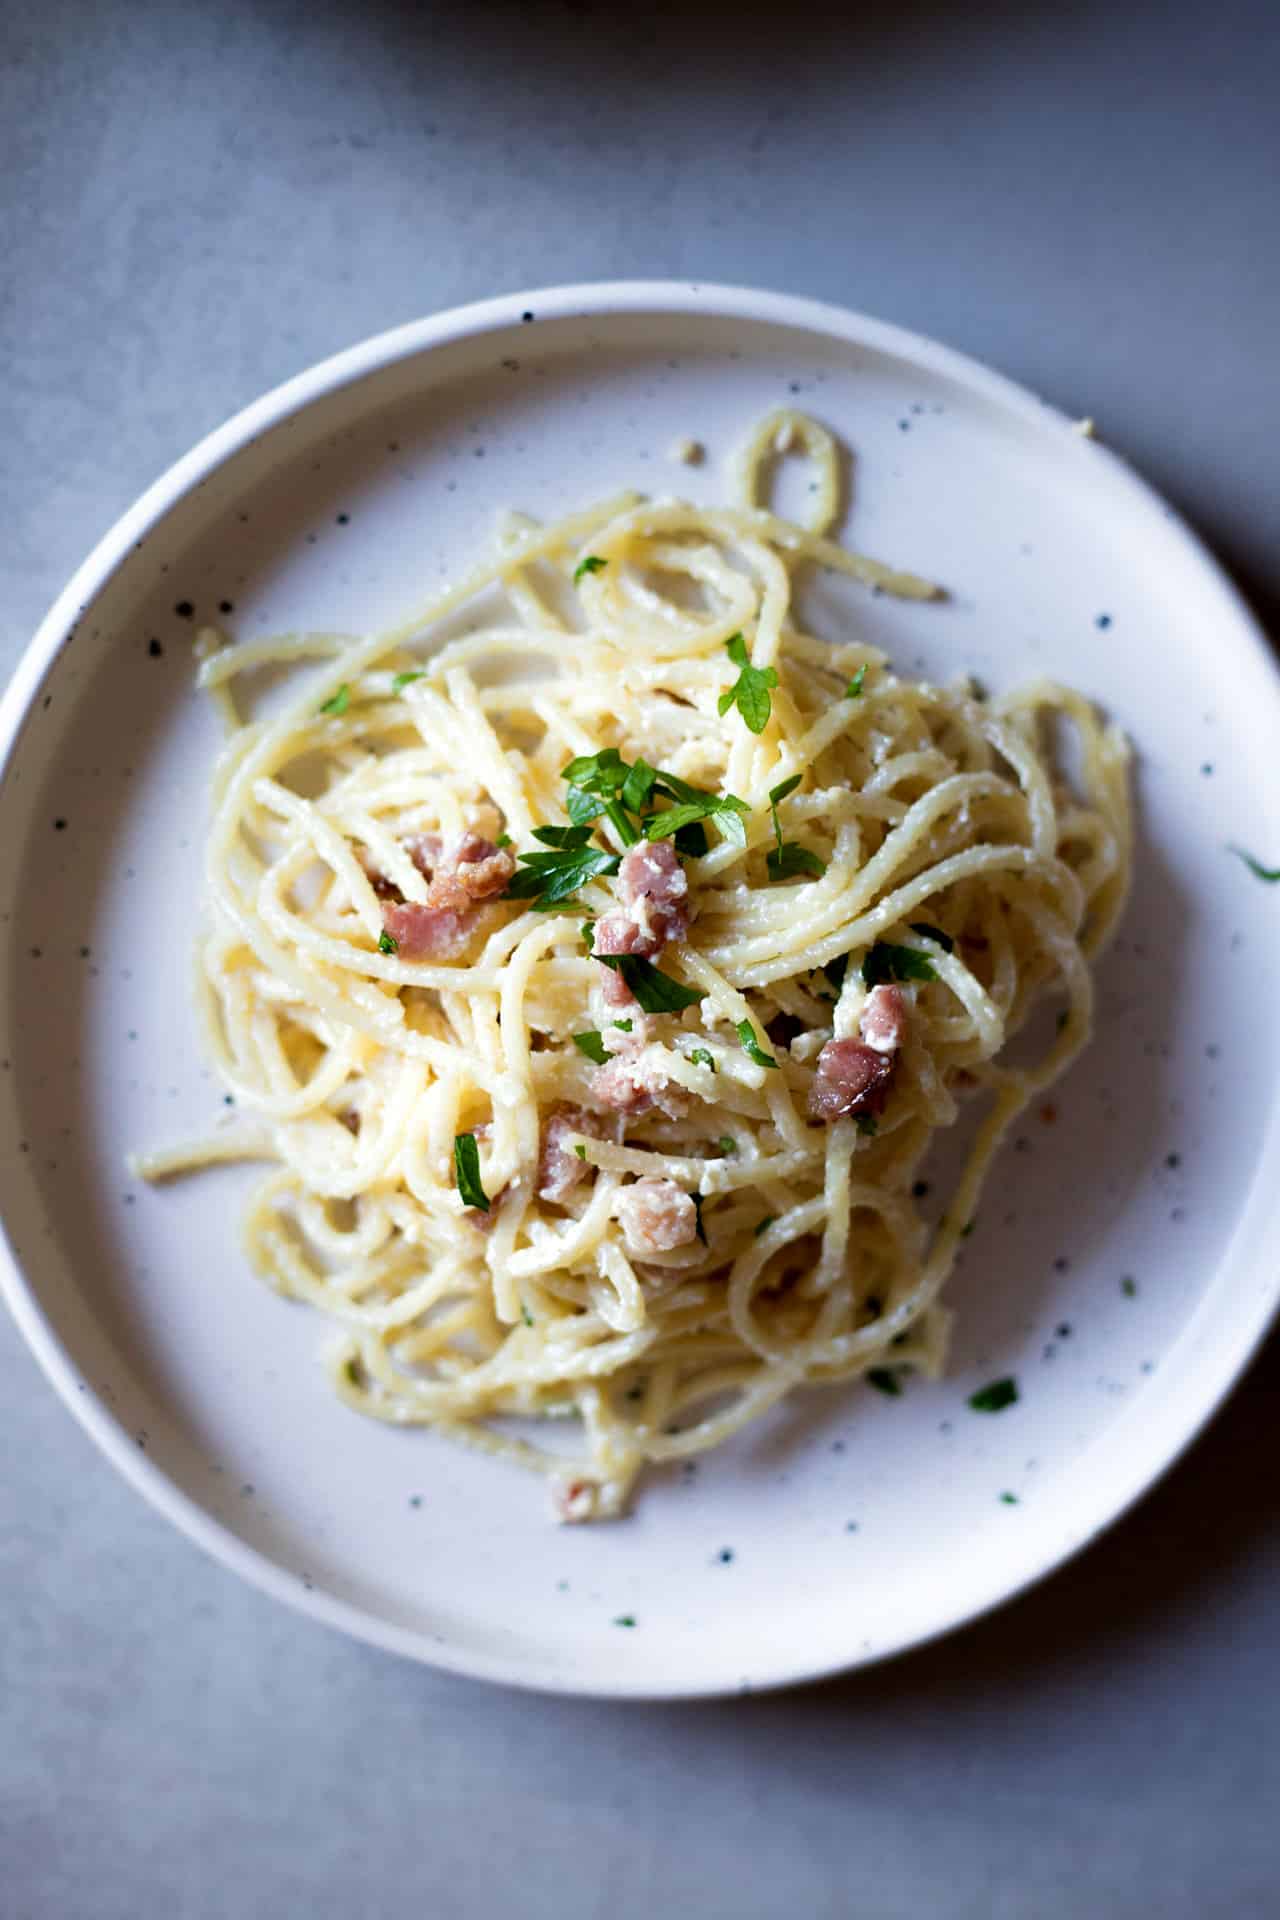 This Eggless Spaghetti Carbonara is Low FODMAP and lactose-free with a dairy-free option. It's a flavorful, comforting and super creamy eggless alternative to the traditional carbonara spaghetti recipe.